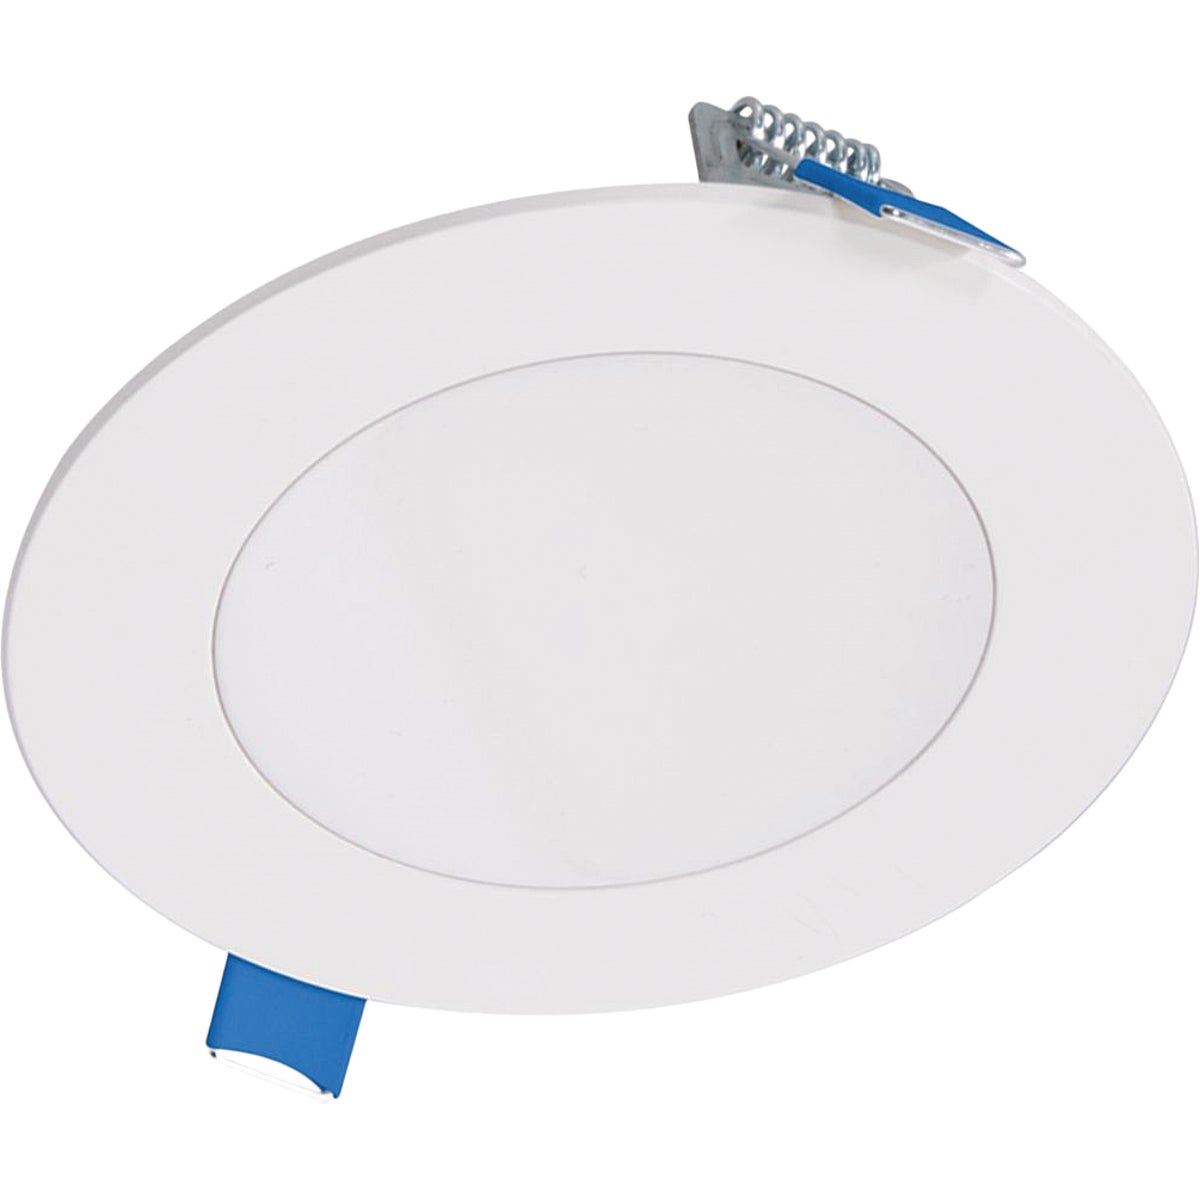 Halo 4 In. LED Direct Mount Up to 735 Lumen Recessed Light